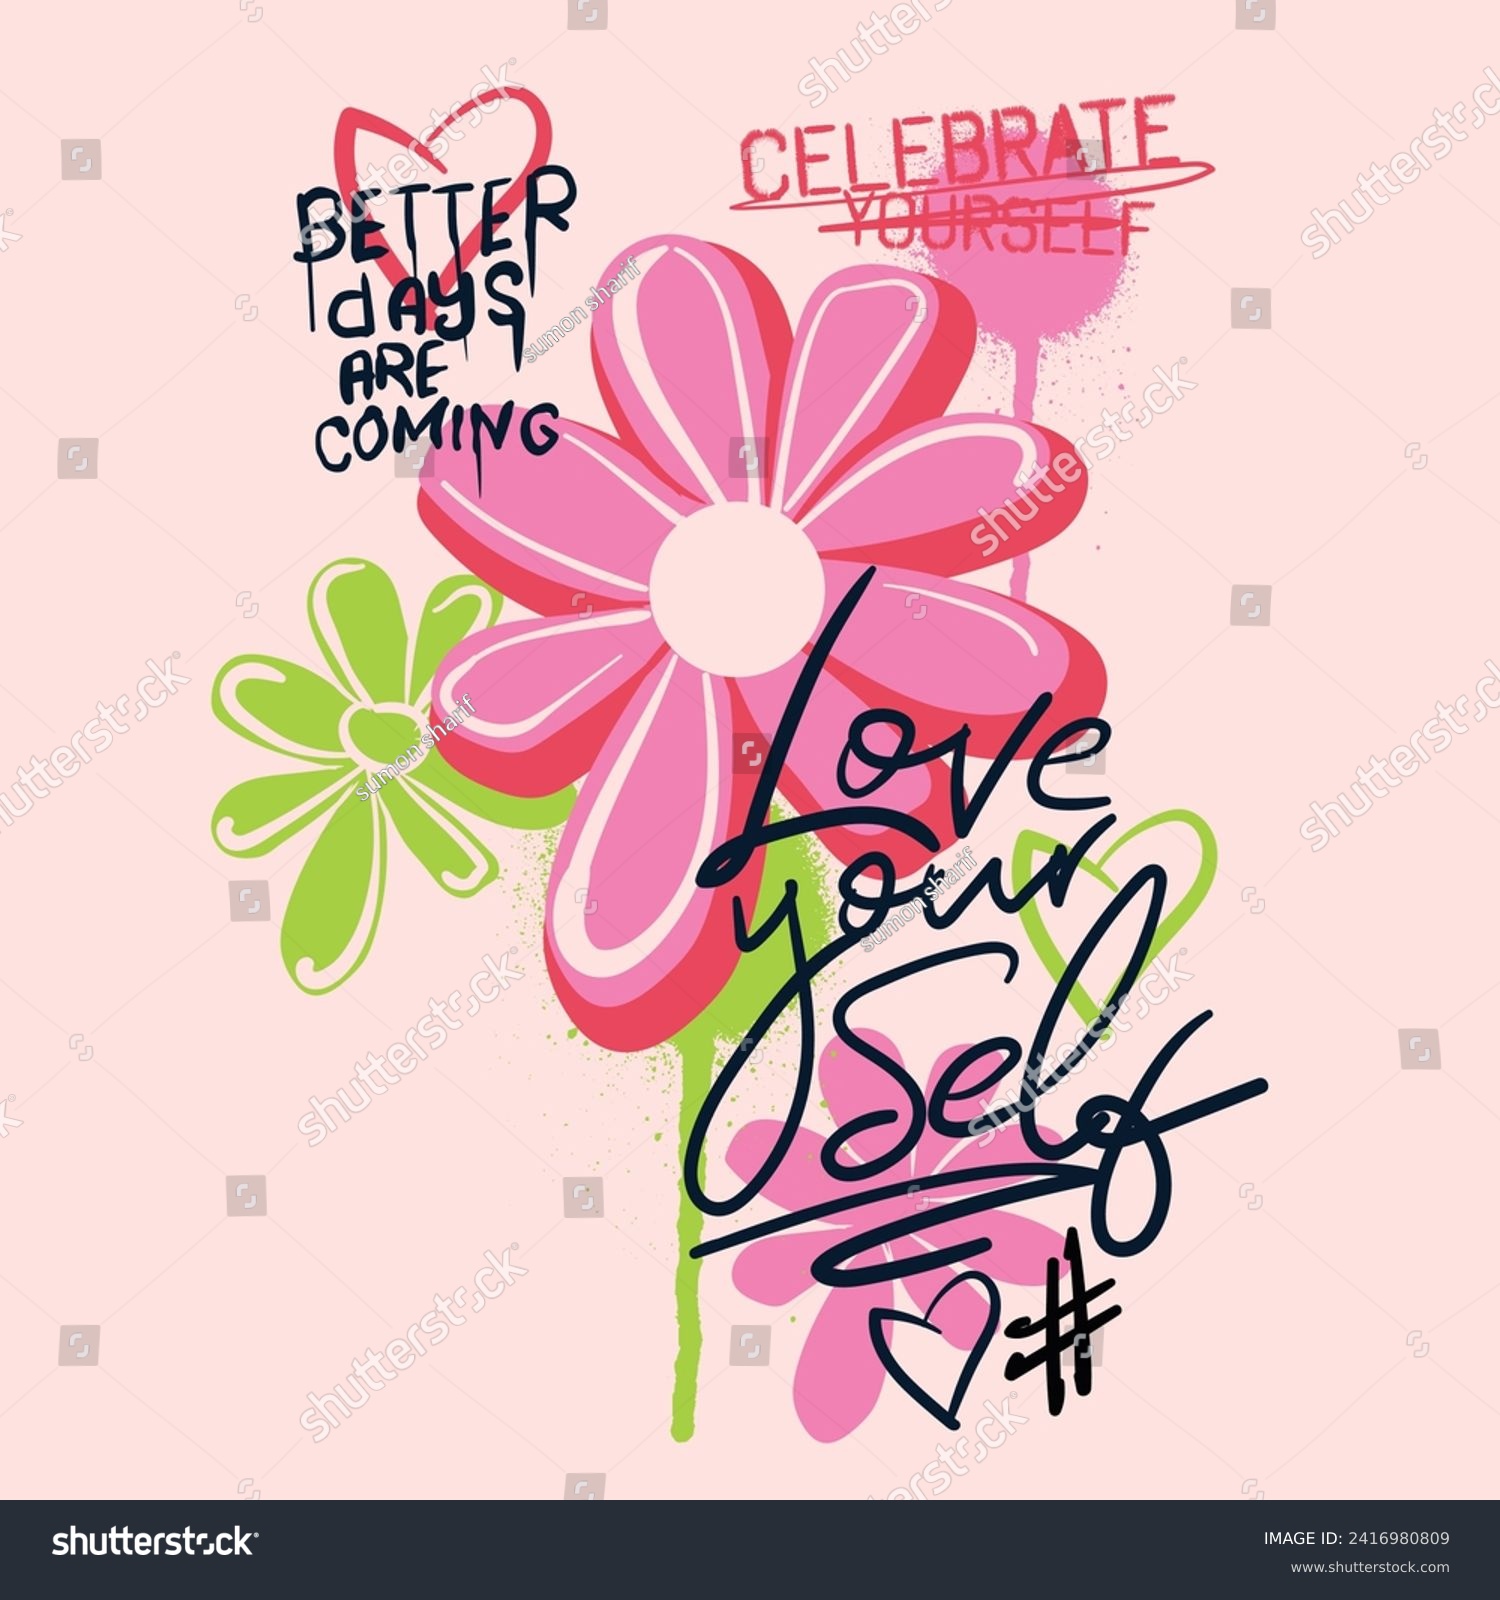 SVG of Graffiti print design, love your self Slogan typography street art, text print and graffiti Flowers love print with spray effect for graphic tee t shirt or sweatshirt - Vector svg